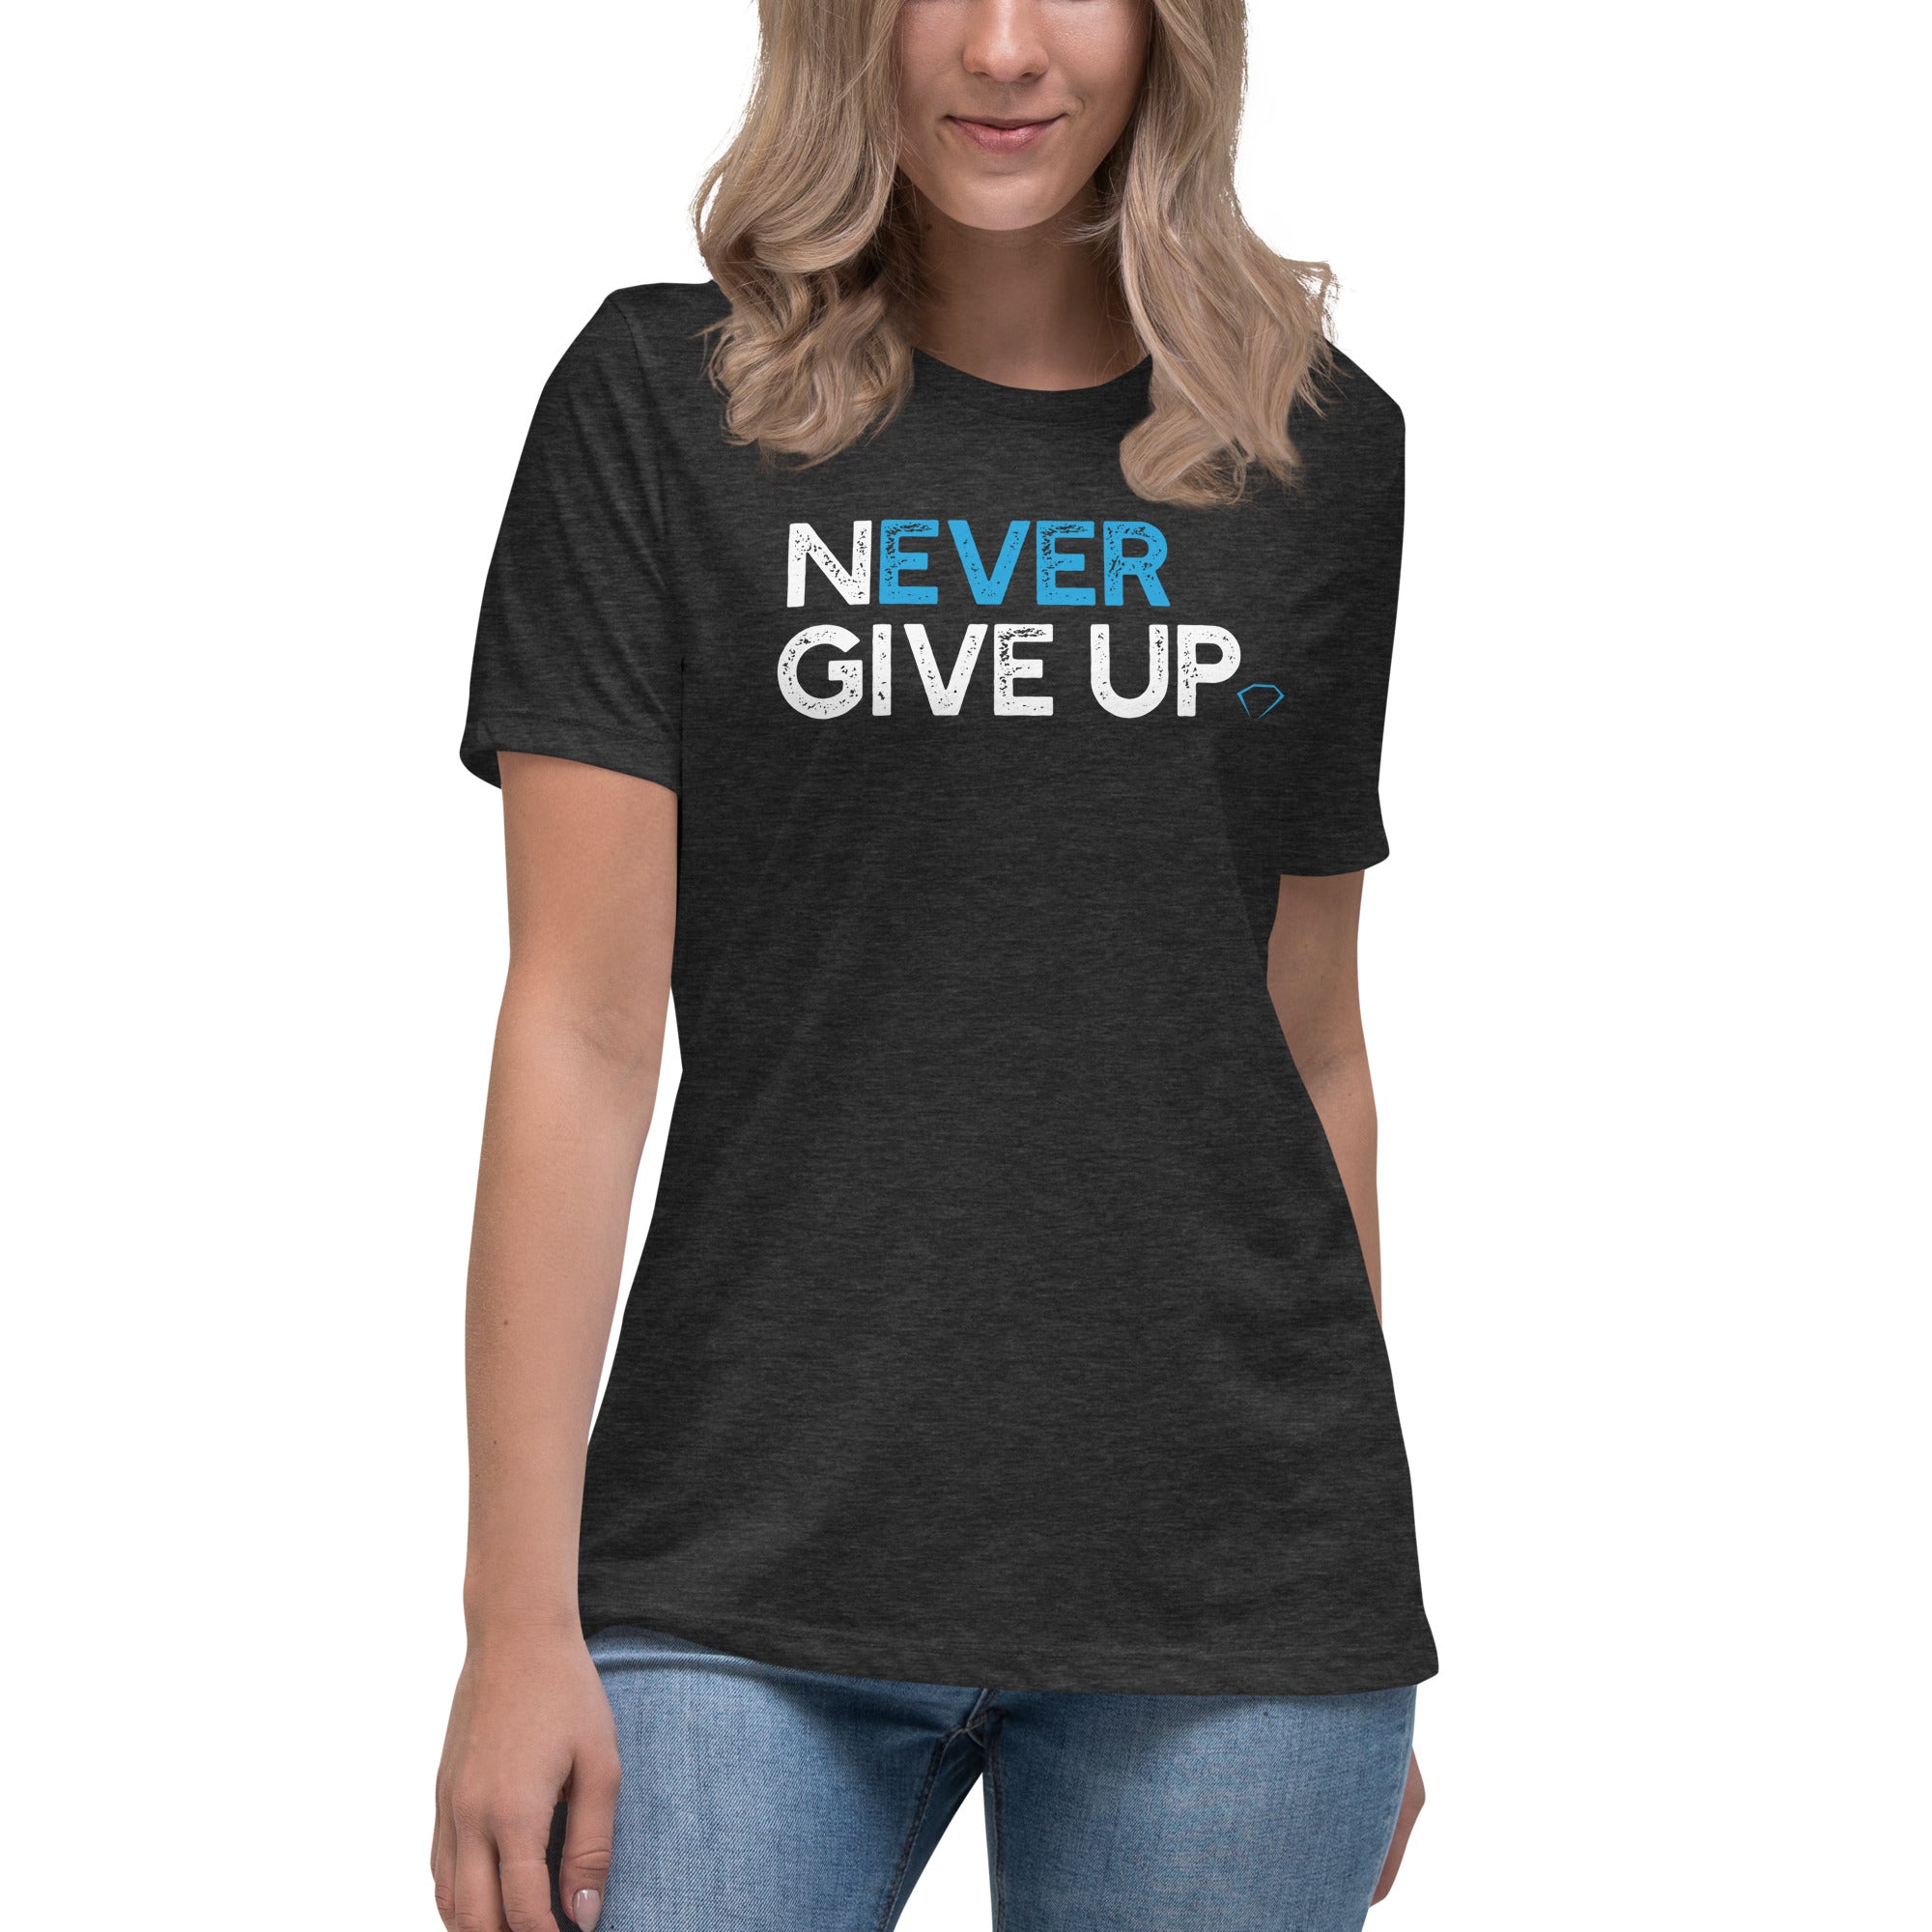 Never Give Up Women's Relaxed T-Shirt (On Demand Printing)